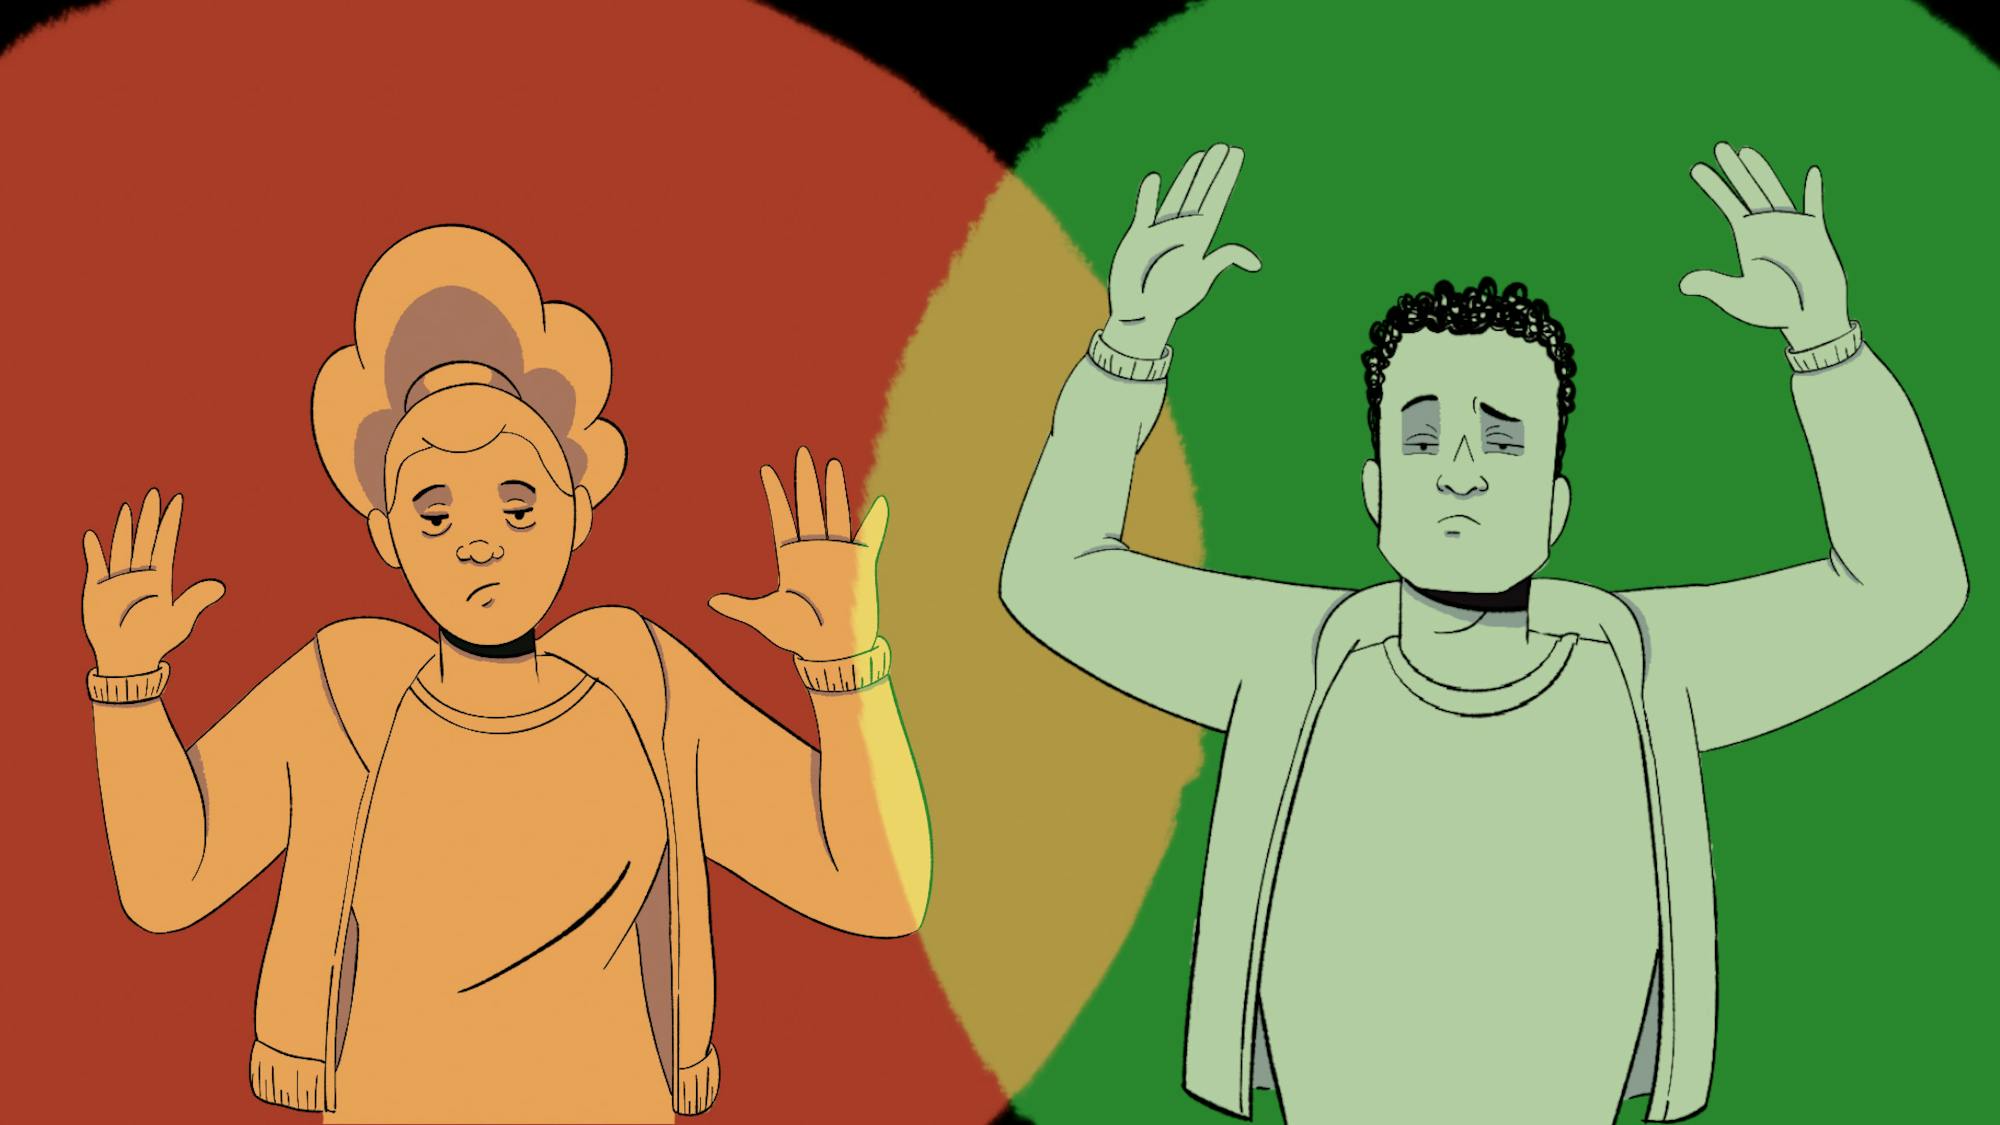 An animation by an anonymous artist. It shows a woman and a man framed in circles of red and green light. Both have their hands up. In the film, this image is accompanied by an increasingly frantic narration: “Red light stop; green light frisk.”